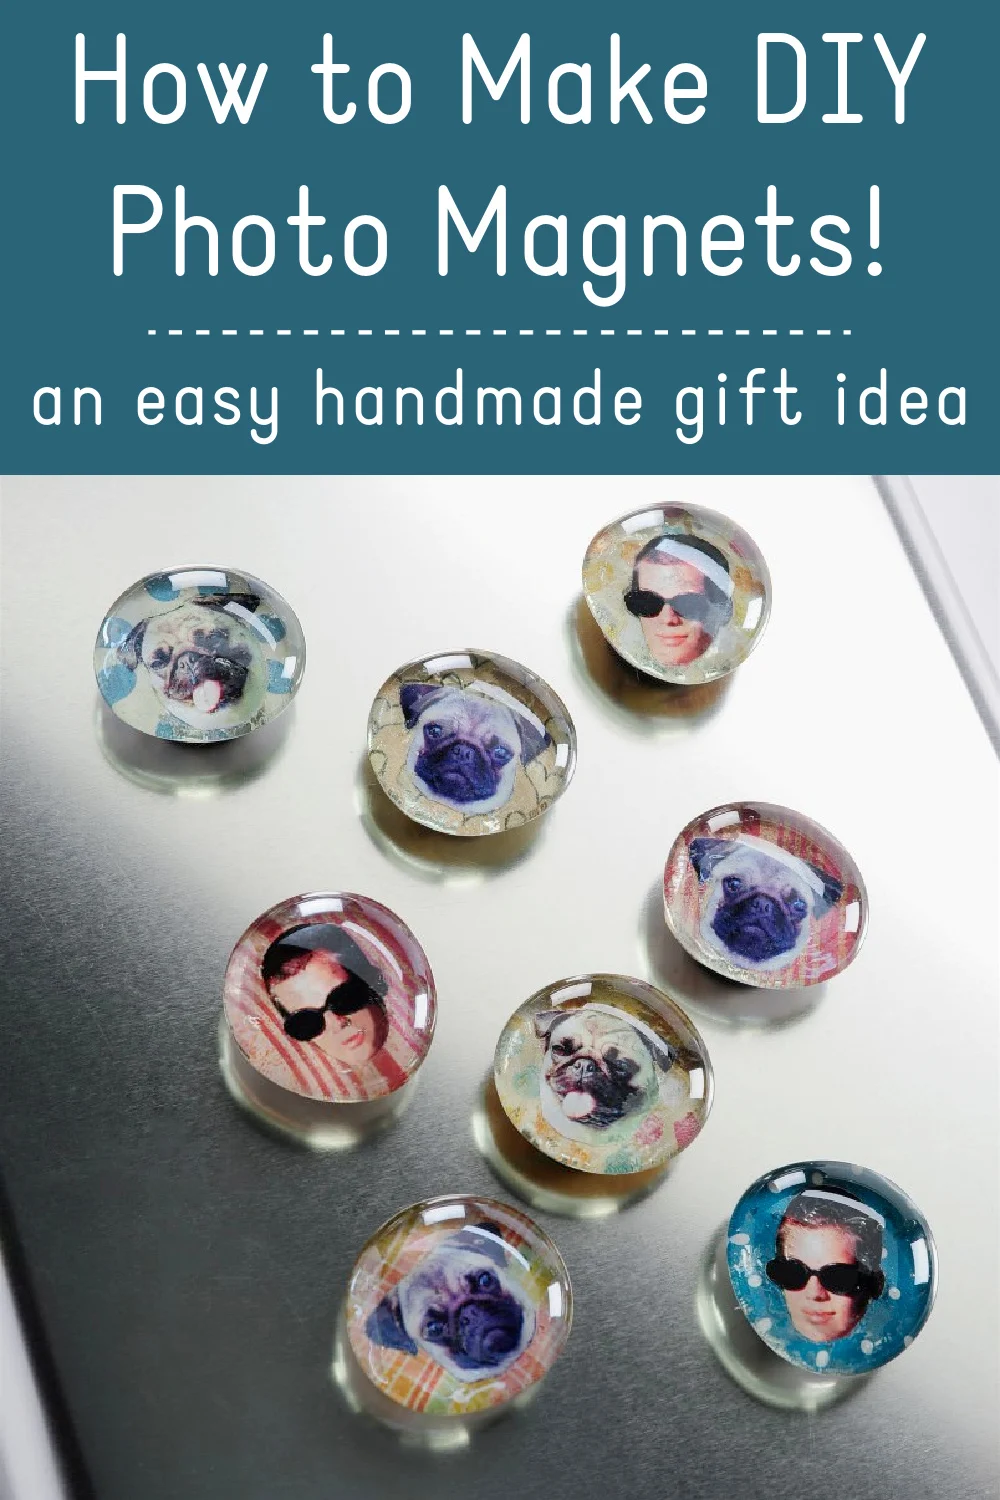 How to transfer photos on wood -4 different ways - A girl and a glue gun